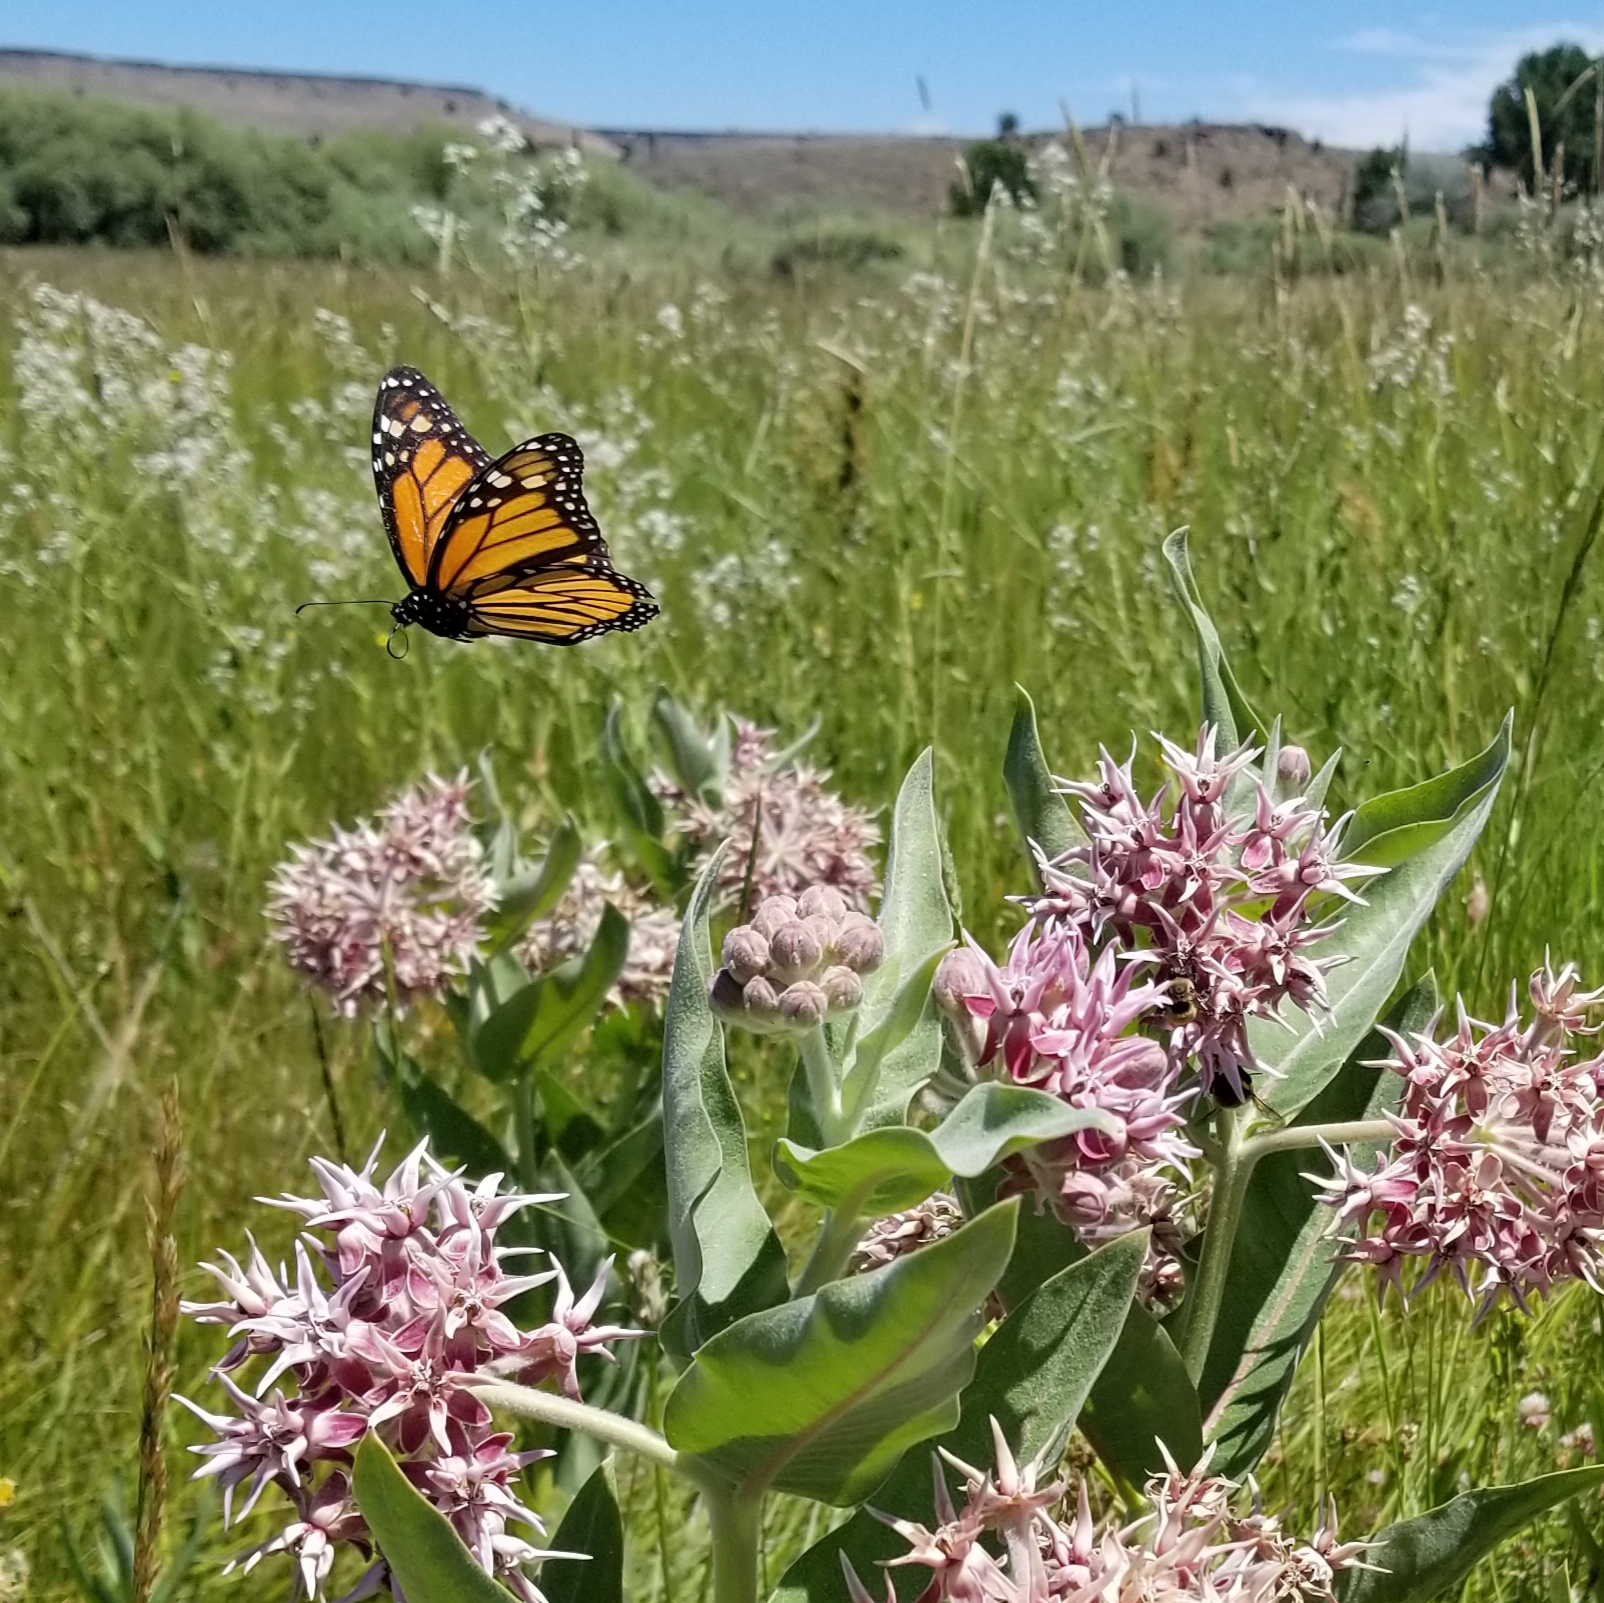 A bright orange monarch flutters over pink milkweed blossoms on a sunny day, in a landscape filled with green grass.